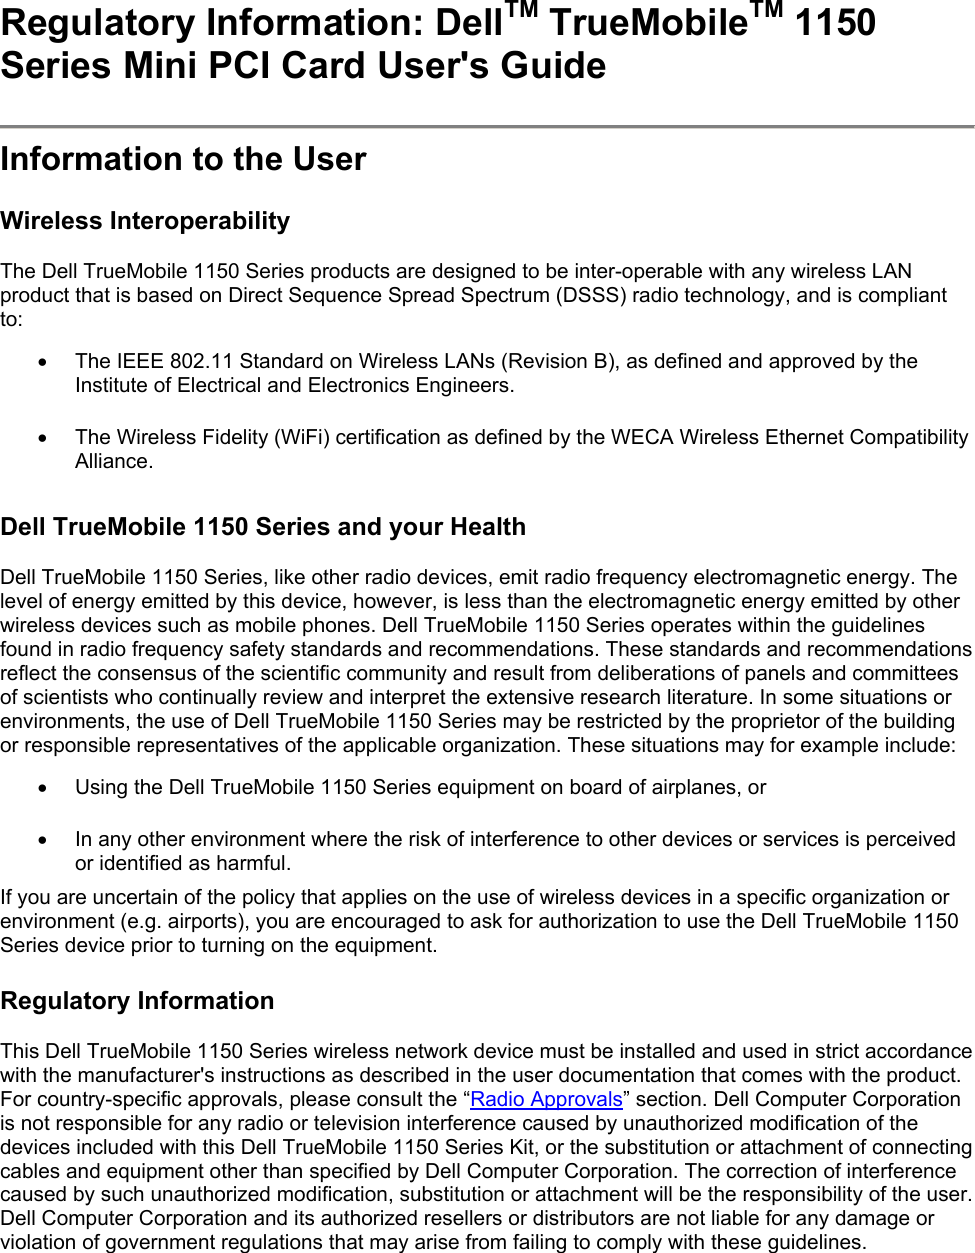 Regulatory Information: DellTM TrueMobileTM 1150 Series Mini PCI Card User&apos;s Guide   Information to the User  Wireless Interoperability  The Dell TrueMobile 1150 Series products are designed to be inter-operable with any wireless LAN product that is based on Direct Sequence Spread Spectrum (DSSS) radio technology, and is compliant to:  •  The IEEE 802.11 Standard on Wireless LANs (Revision B), as defined and approved by the Institute of Electrical and Electronics Engineers.  •  The Wireless Fidelity (WiFi) certification as defined by the WECA Wireless Ethernet Compatibility Alliance.   Dell TrueMobile 1150 Series and your Health  Dell TrueMobile 1150 Series, like other radio devices, emit radio frequency electromagnetic energy. The level of energy emitted by this device, however, is less than the electromagnetic energy emitted by other wireless devices such as mobile phones. Dell TrueMobile 1150 Series operates within the guidelines found in radio frequency safety standards and recommendations. These standards and recommendations reflect the consensus of the scientific community and result from deliberations of panels and committees of scientists who continually review and interpret the extensive research literature. In some situations or environments, the use of Dell TrueMobile 1150 Series may be restricted by the proprietor of the building or responsible representatives of the applicable organization. These situations may for example include:  •  Using the Dell TrueMobile 1150 Series equipment on board of airplanes, or  •  In any other environment where the risk of interference to other devices or services is perceived or identified as harmful. If you are uncertain of the policy that applies on the use of wireless devices in a specific organization or environment (e.g. airports), you are encouraged to ask for authorization to use the Dell TrueMobile 1150 Series device prior to turning on the equipment.  Regulatory Information  This Dell TrueMobile 1150 Series wireless network device must be installed and used in strict accordance with the manufacturer&apos;s instructions as described in the user documentation that comes with the product. For country-specific approvals, please consult the “Radio Approvals” section. Dell Computer Corporation is not responsible for any radio or television interference caused by unauthorized modification of the devices included with this Dell TrueMobile 1150 Series Kit, or the substitution or attachment of connecting cables and equipment other than specified by Dell Computer Corporation. The correction of interference caused by such unauthorized modification, substitution or attachment will be the responsibility of the user. Dell Computer Corporation and its authorized resellers or distributors are not liable for any damage or violation of government regulations that may arise from failing to comply with these guidelines. 